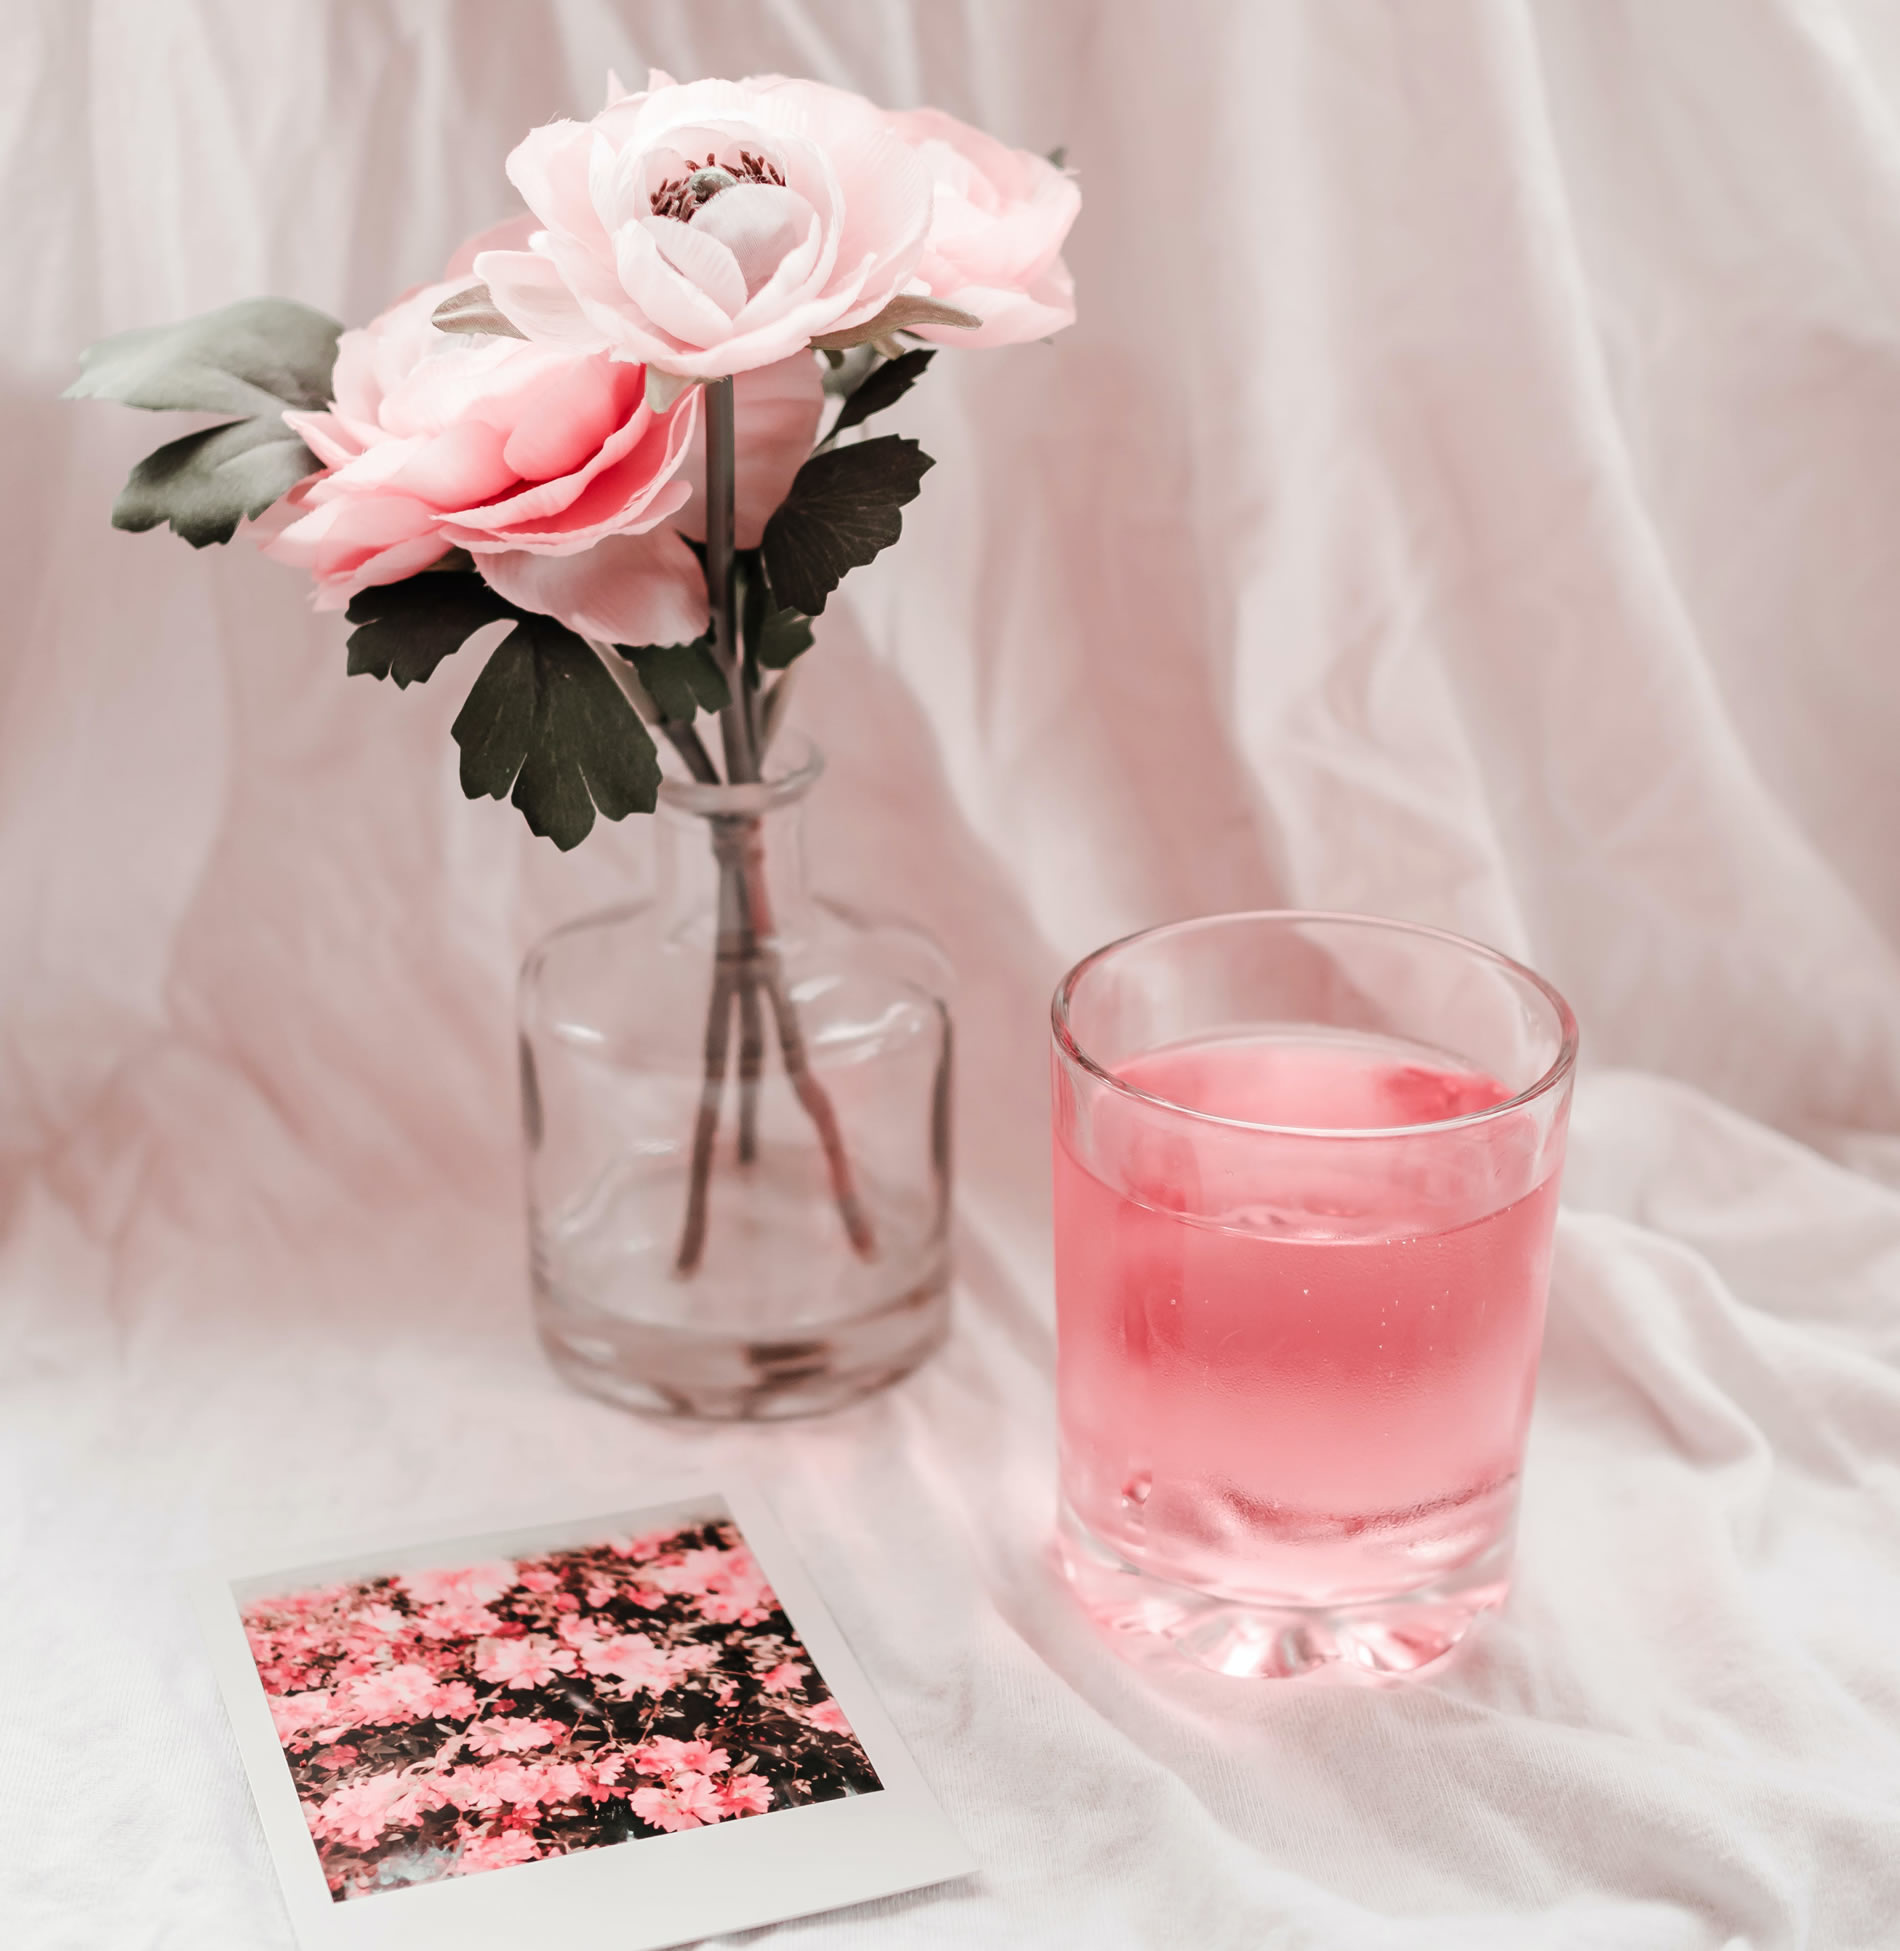 Cup of collagen juice drink on the table with roses beside it